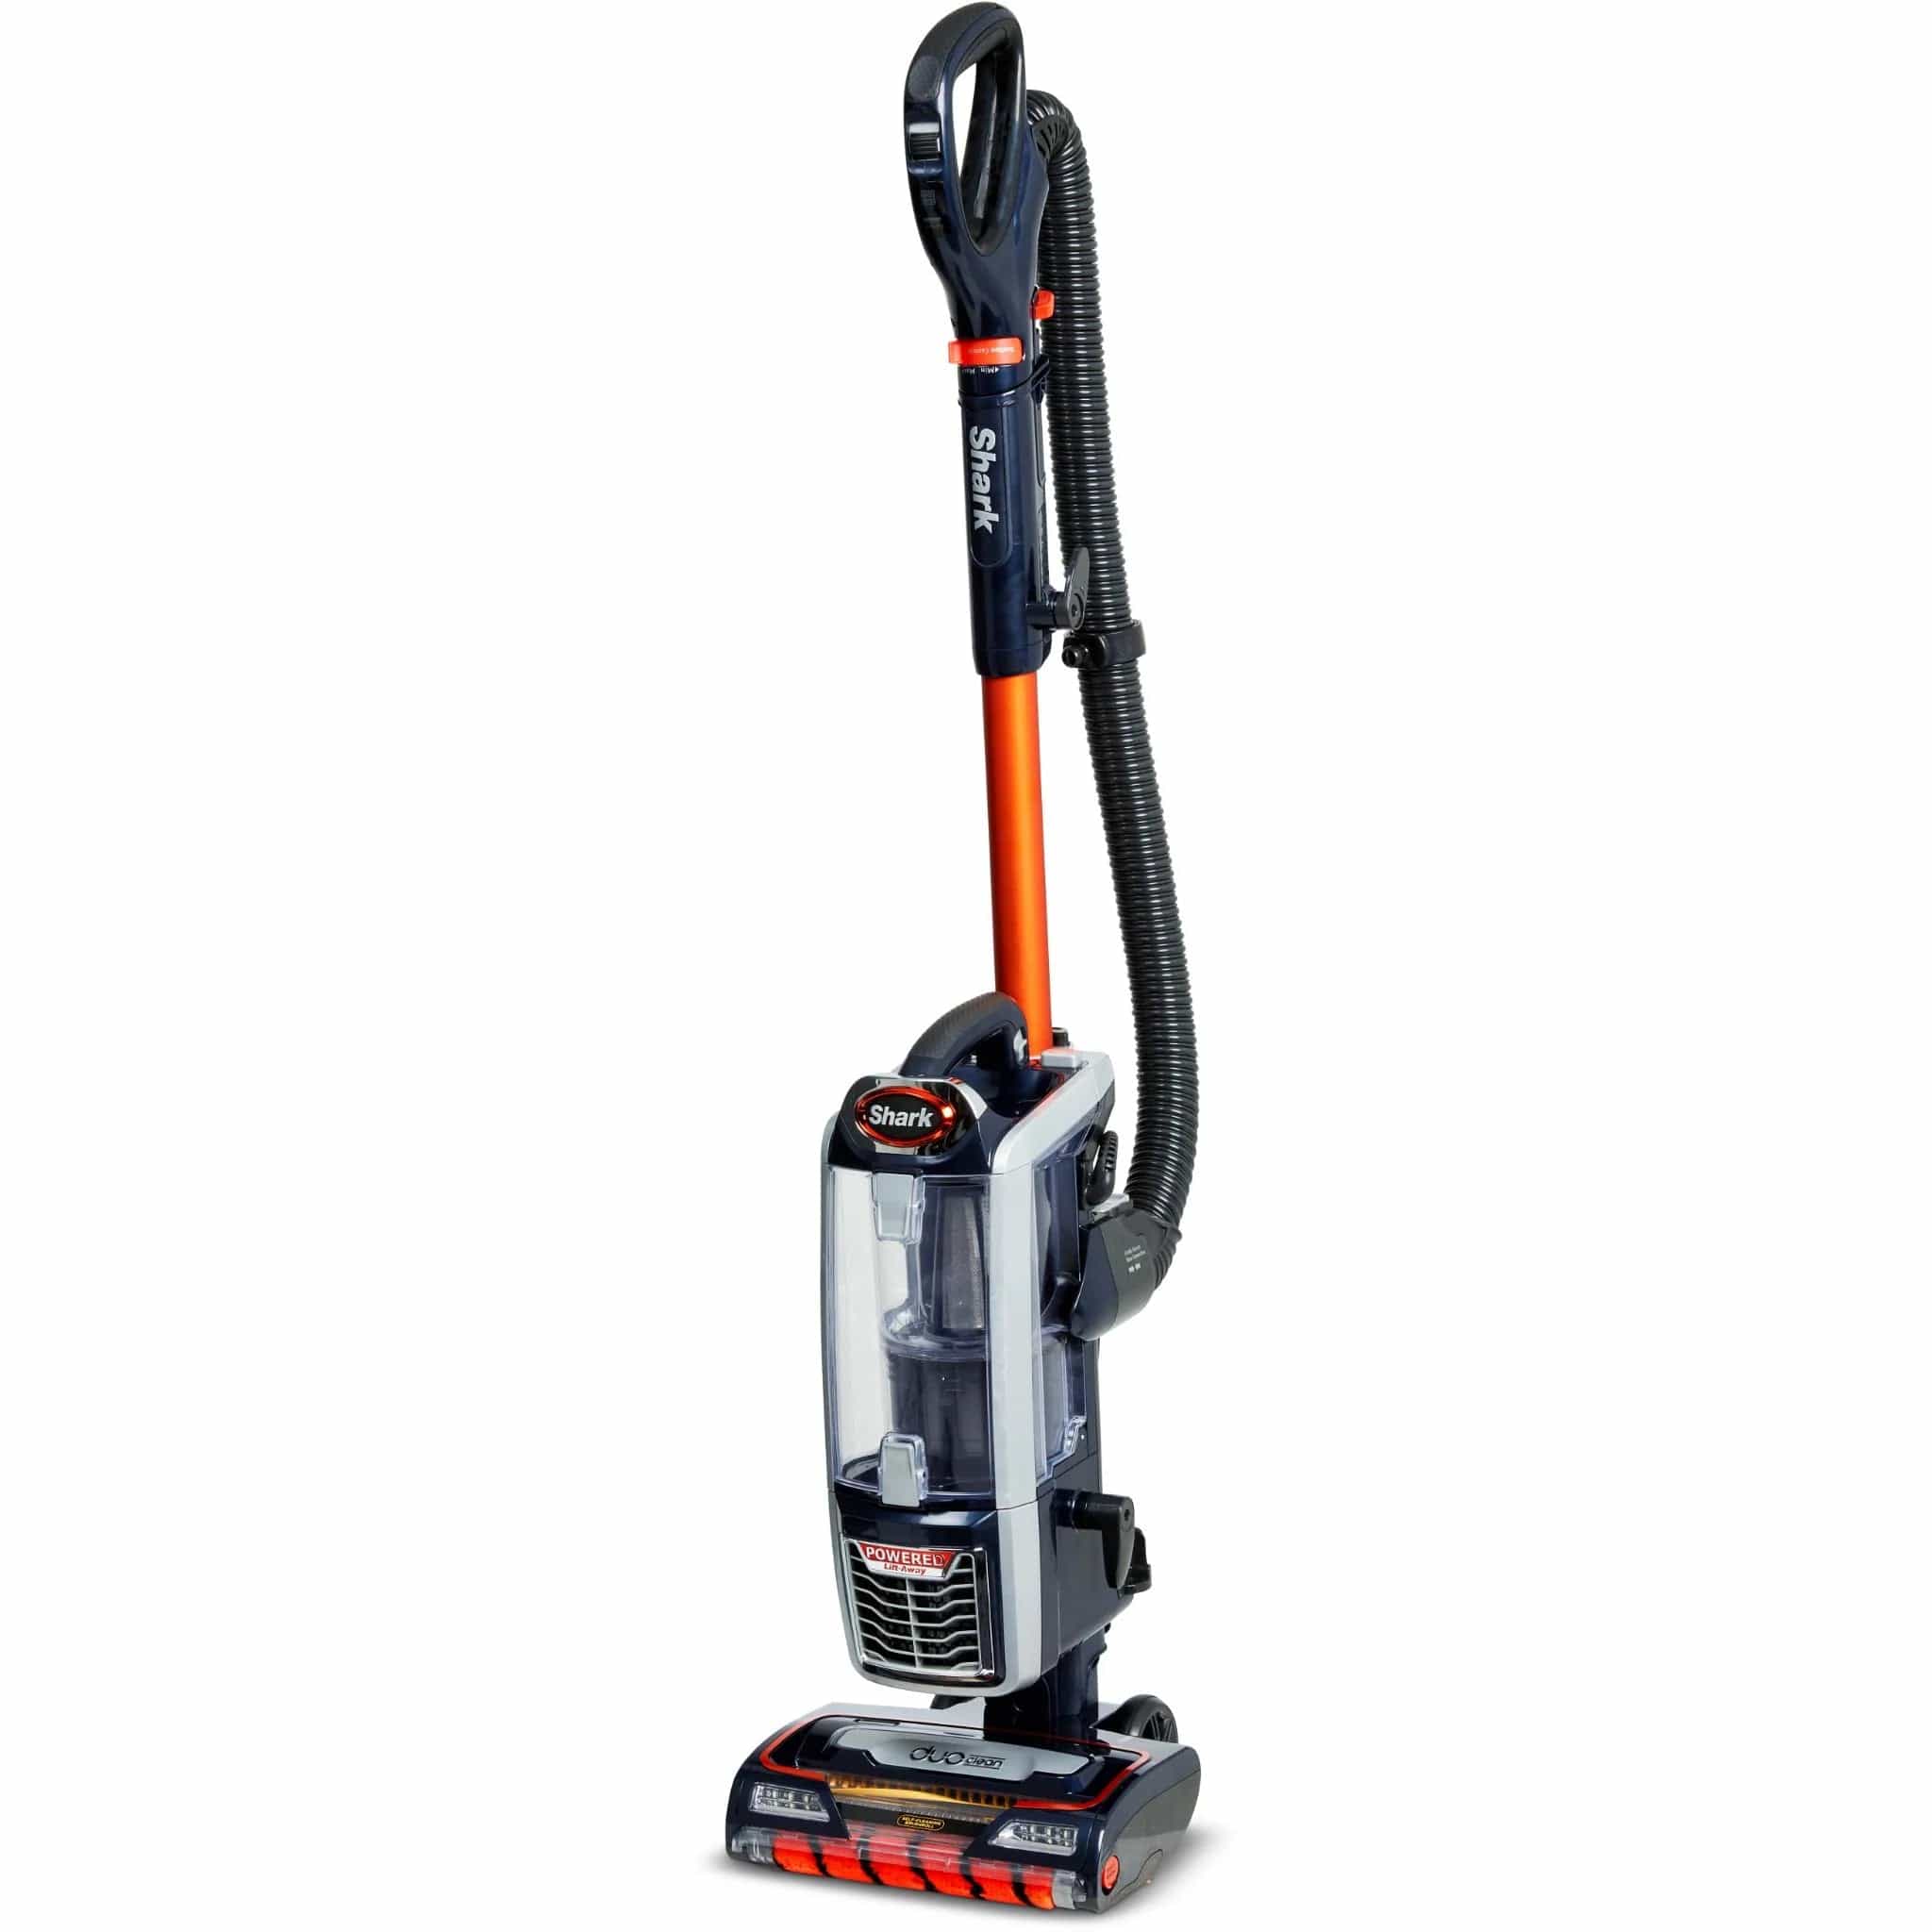 Shark Corded Upright Vacuum with Duo clean Technology for Powerful Cleaning